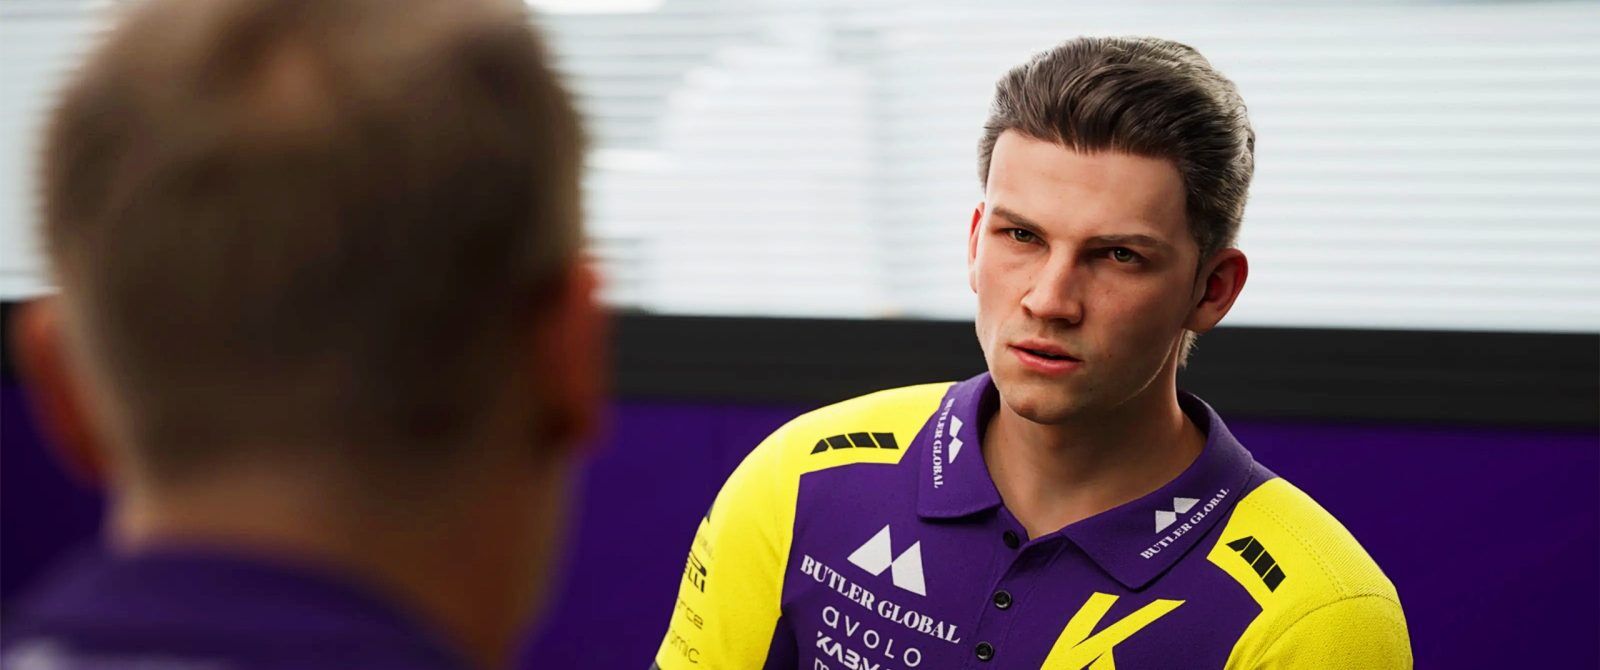 A man wearing a purple and yellow polo shirt.